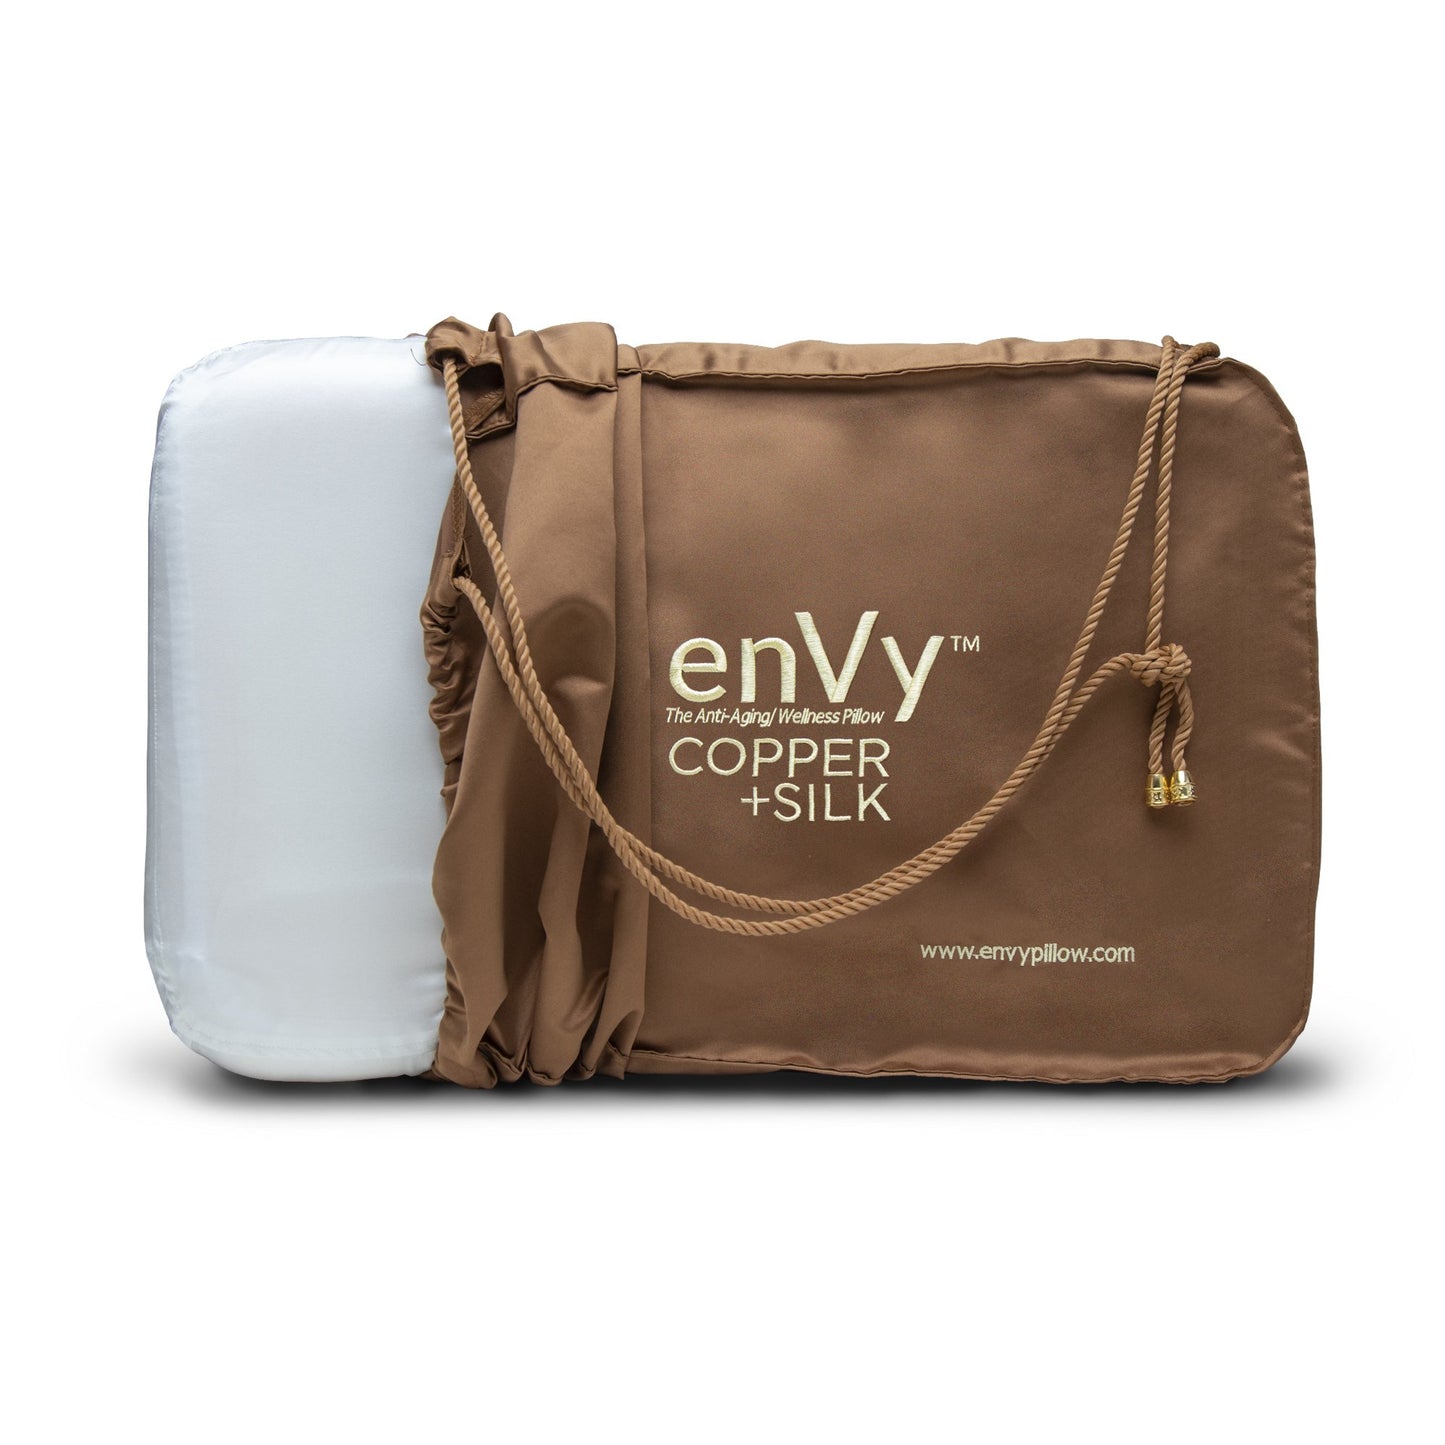 envy™ silk covered + copper powered natural latex anti-aging pillow